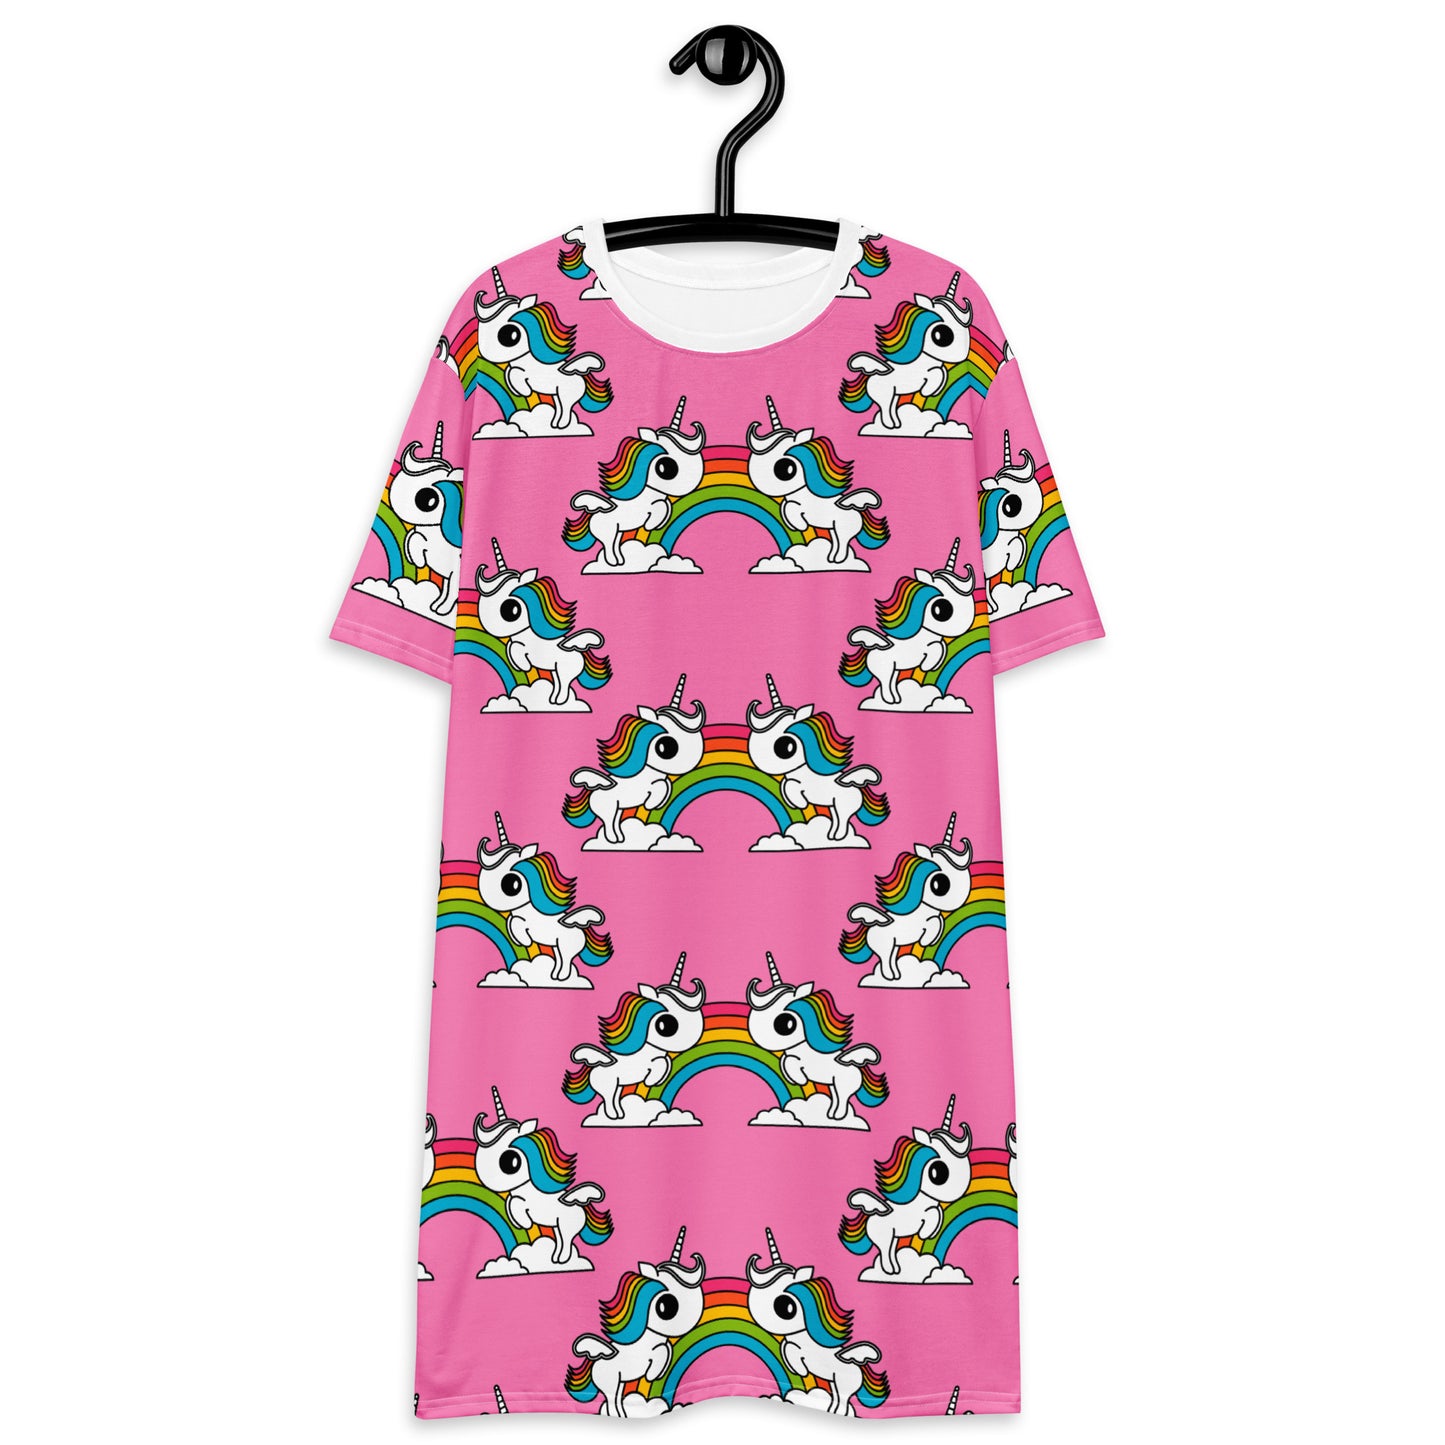 UNIQUE pink - T-shirt dress with unicorns and rainbows